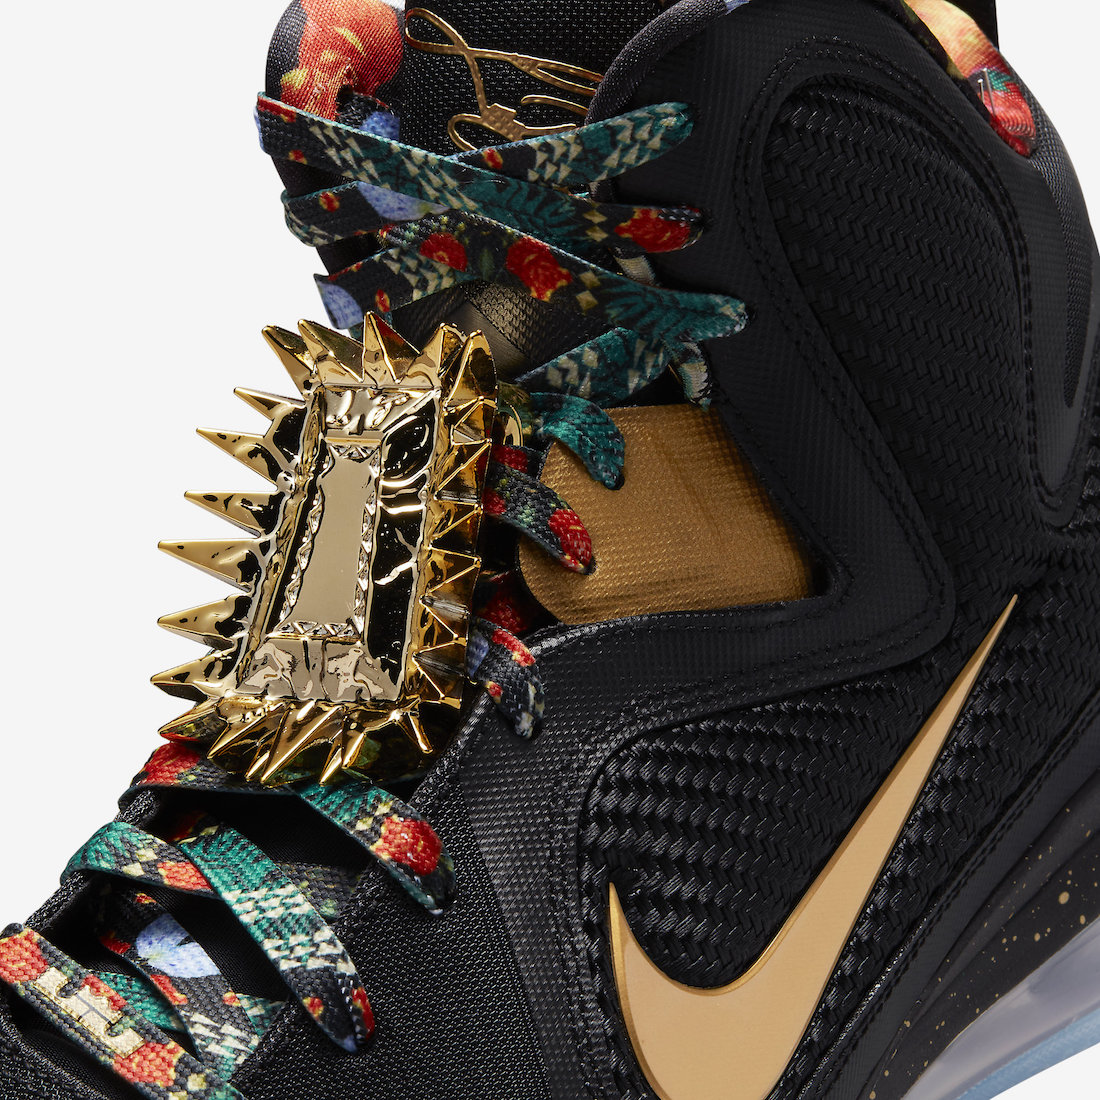 Nike-LeBron-9-Watch-The-Throne-DO9353-001-Release-Date-8